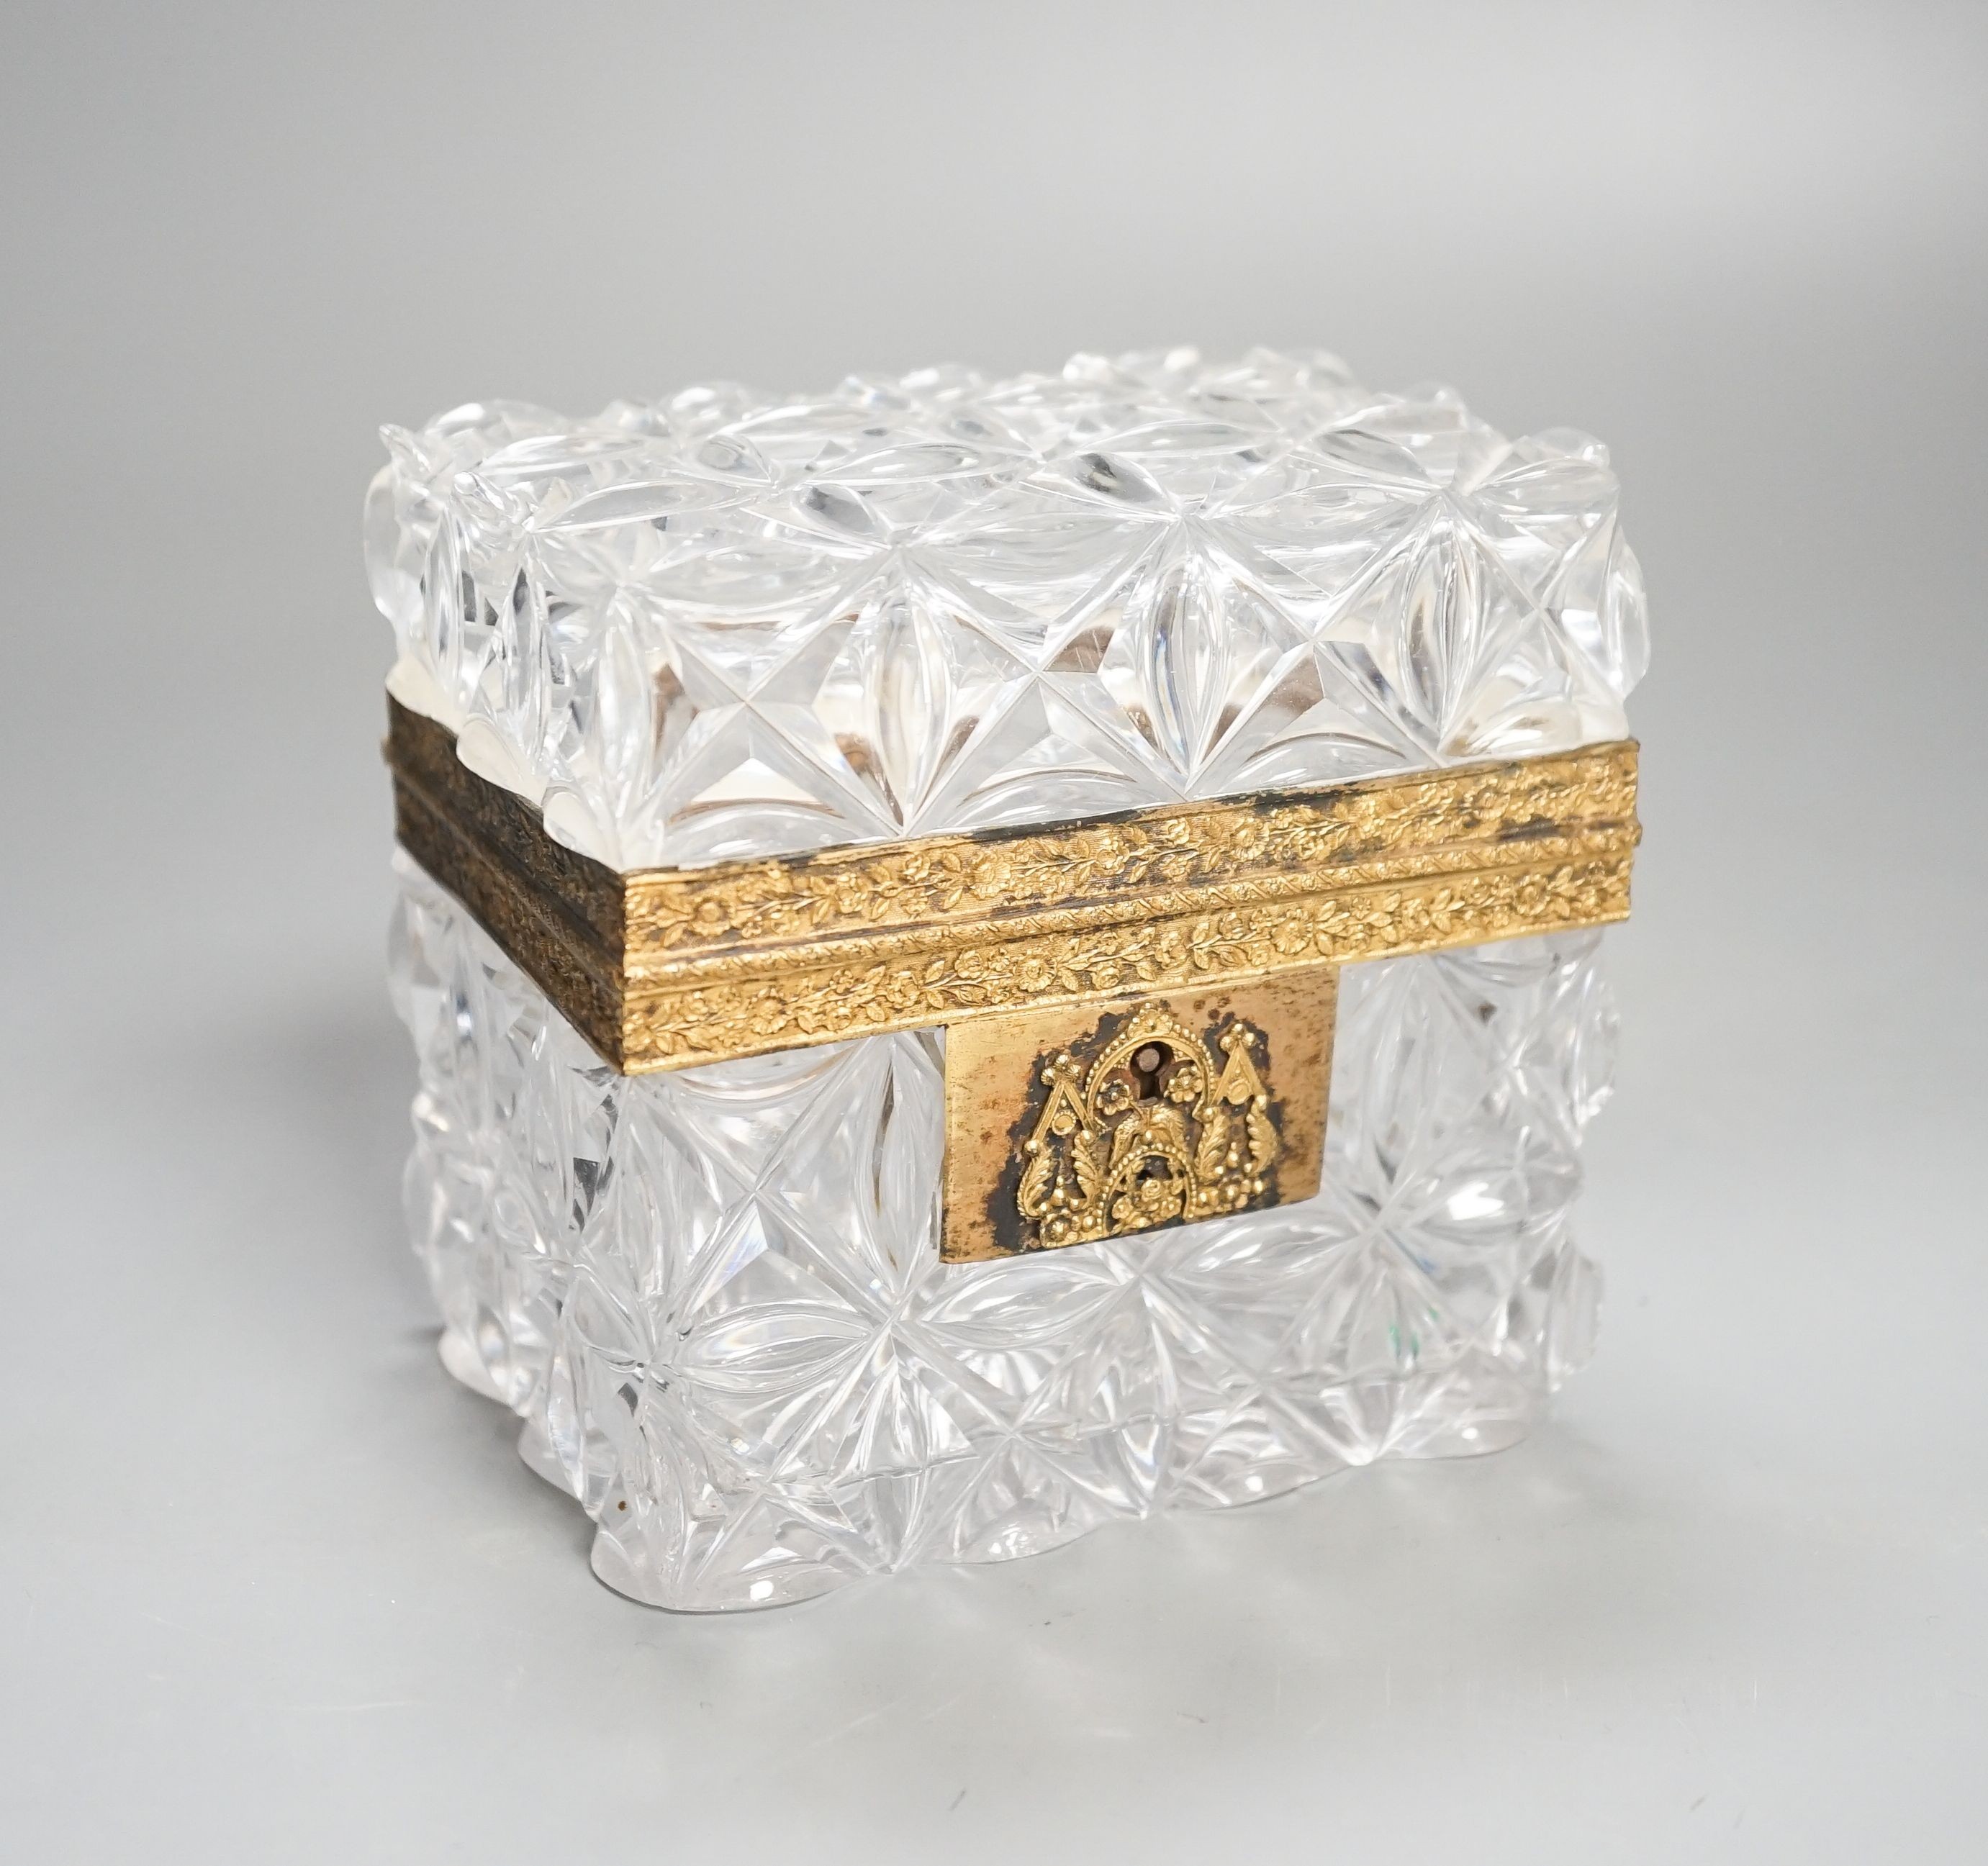 A mid 19th century French cut glass and ormolu mounted casket, probably Baccarat, 11cm